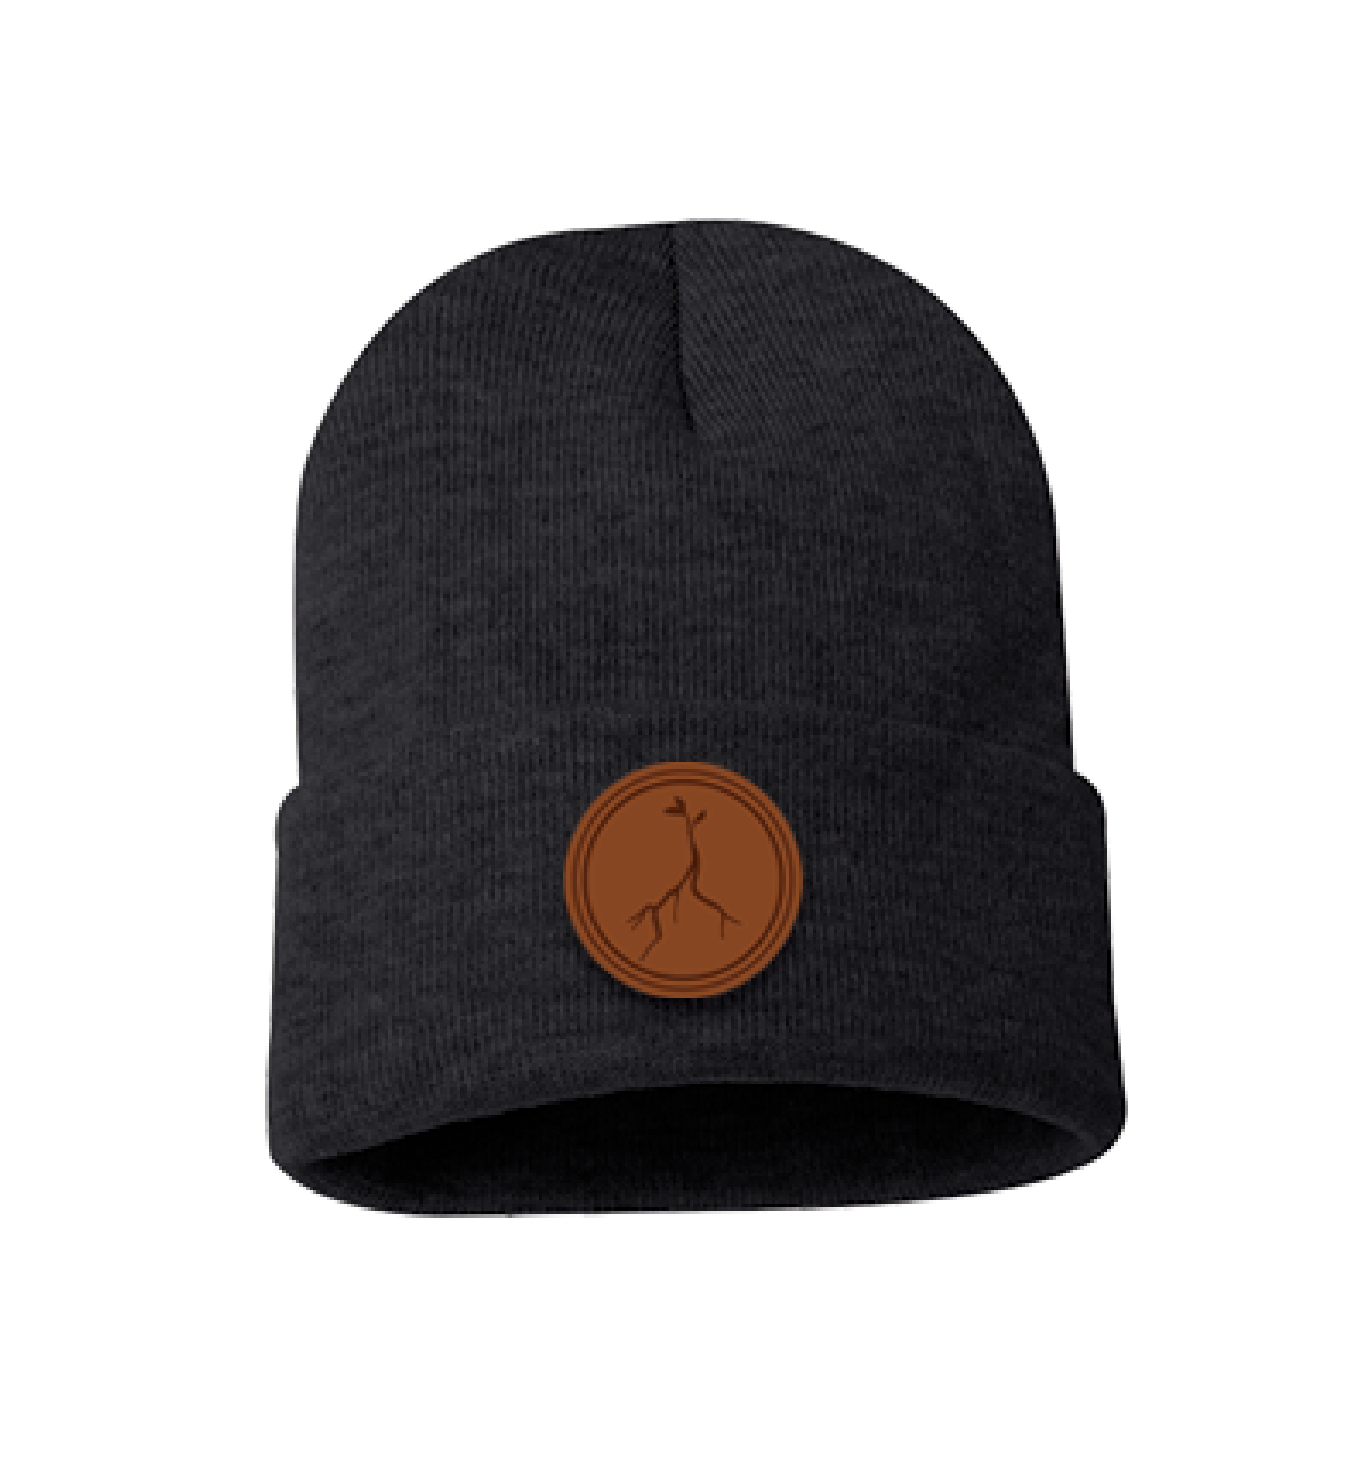 Leather Patched Beanies